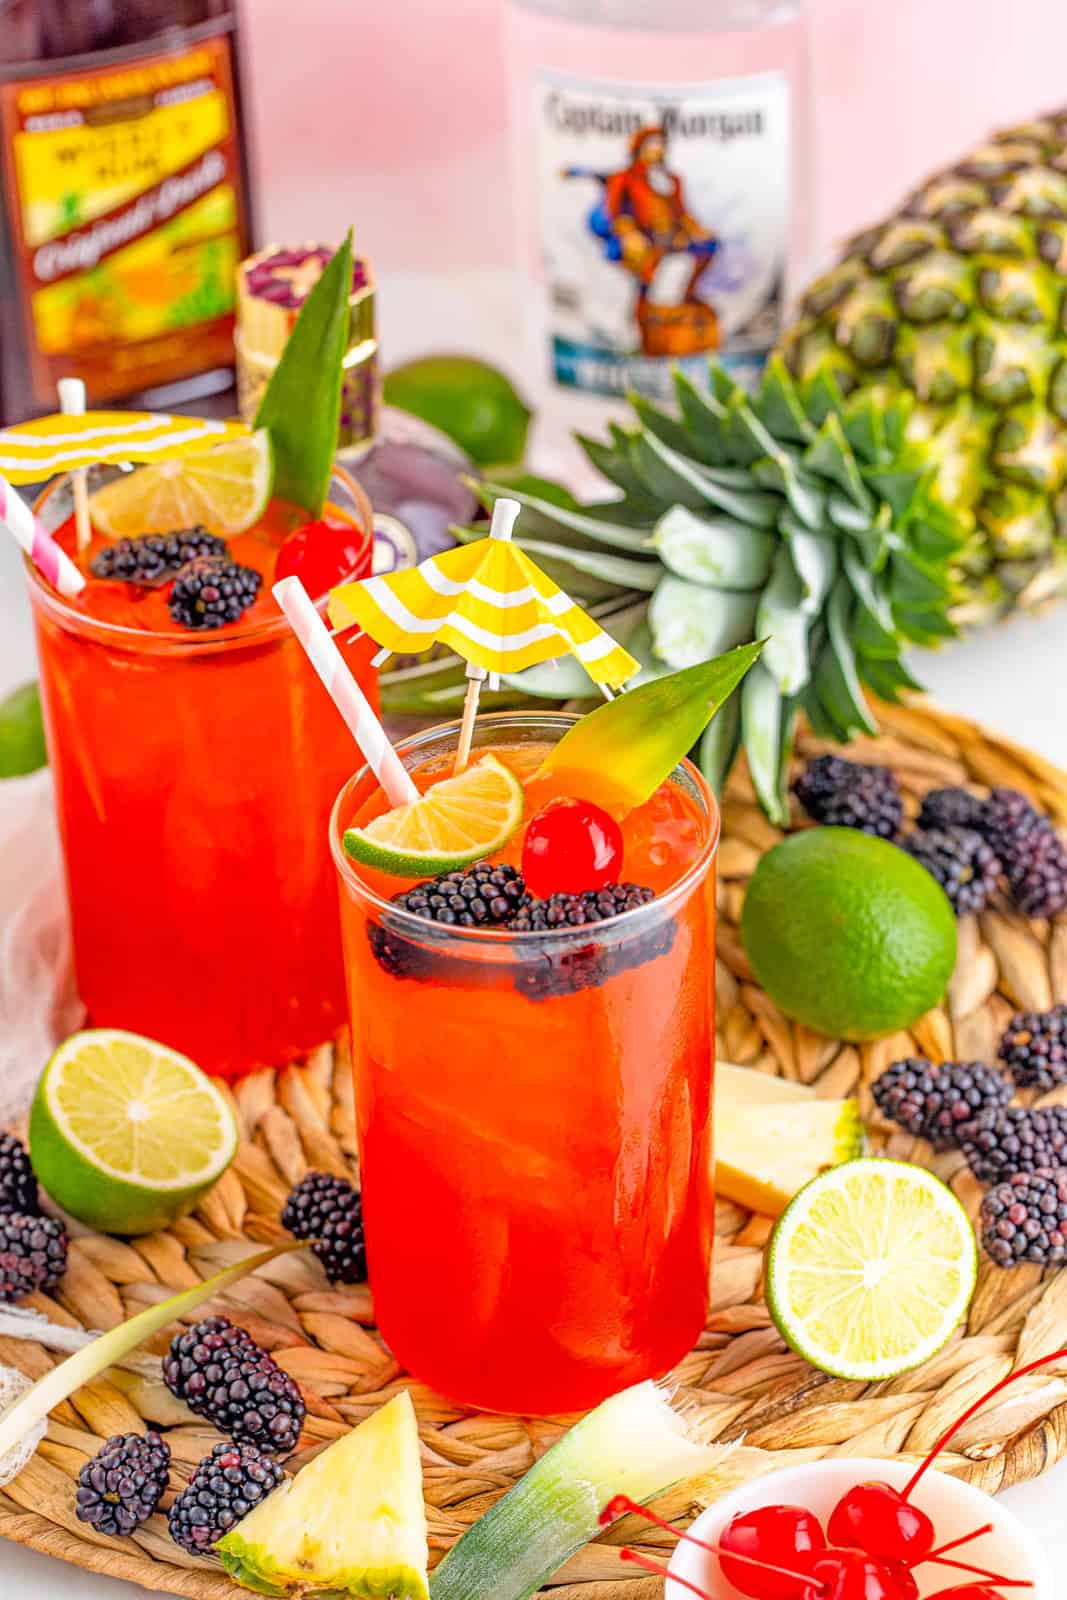 Two Rum Runner Cocktails on wicker tray with fruit and garnishes.